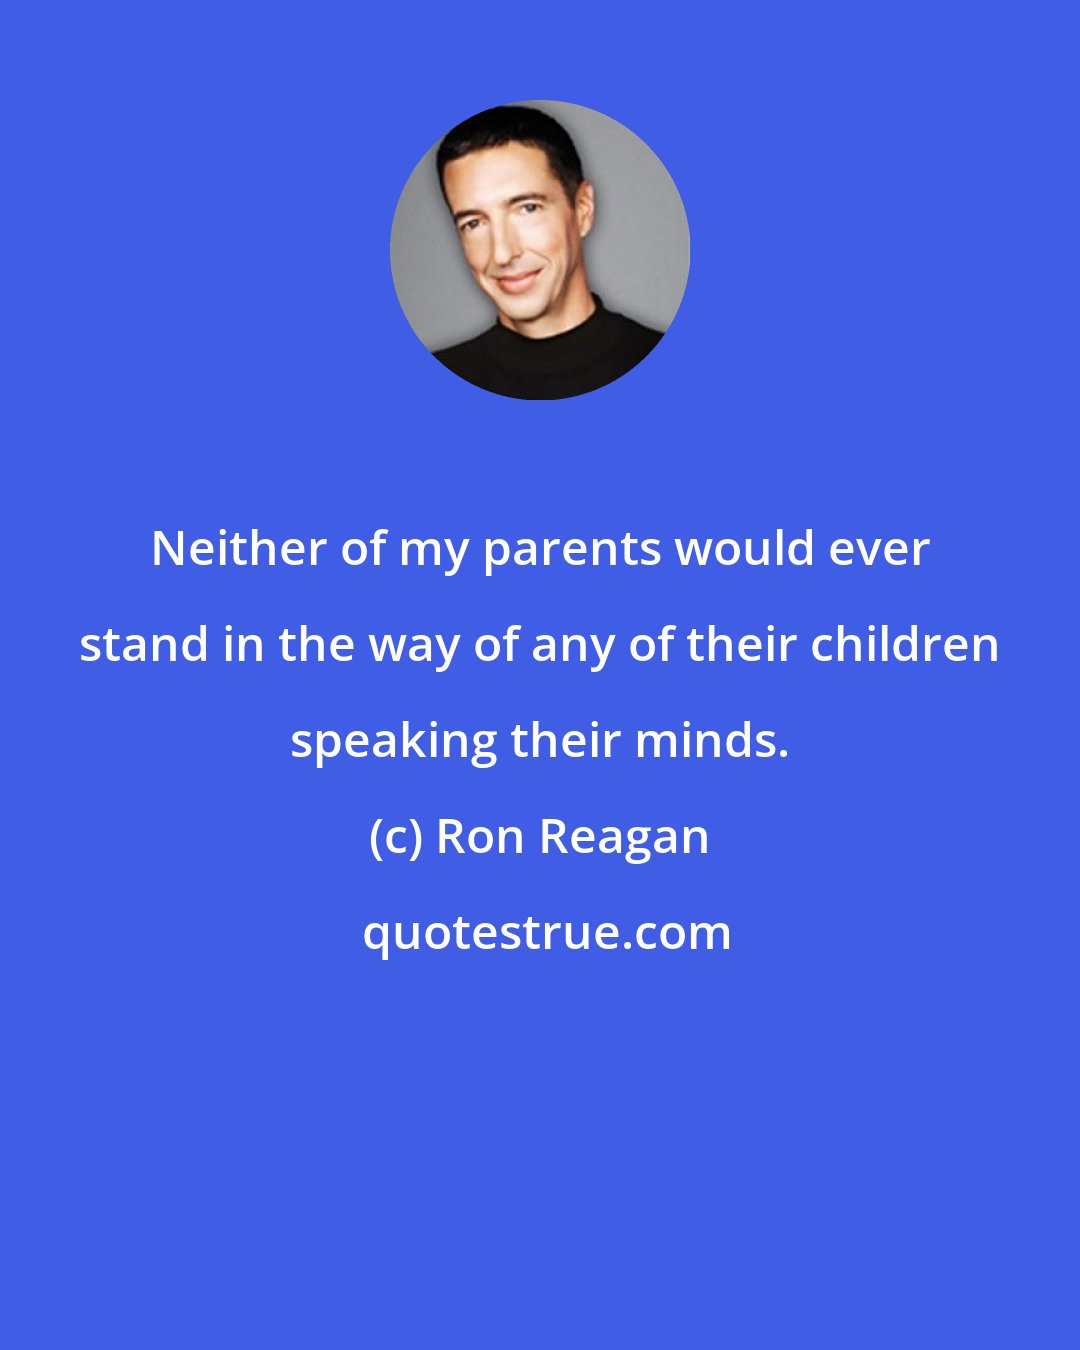 Ron Reagan: Neither of my parents would ever stand in the way of any of their children speaking their minds.